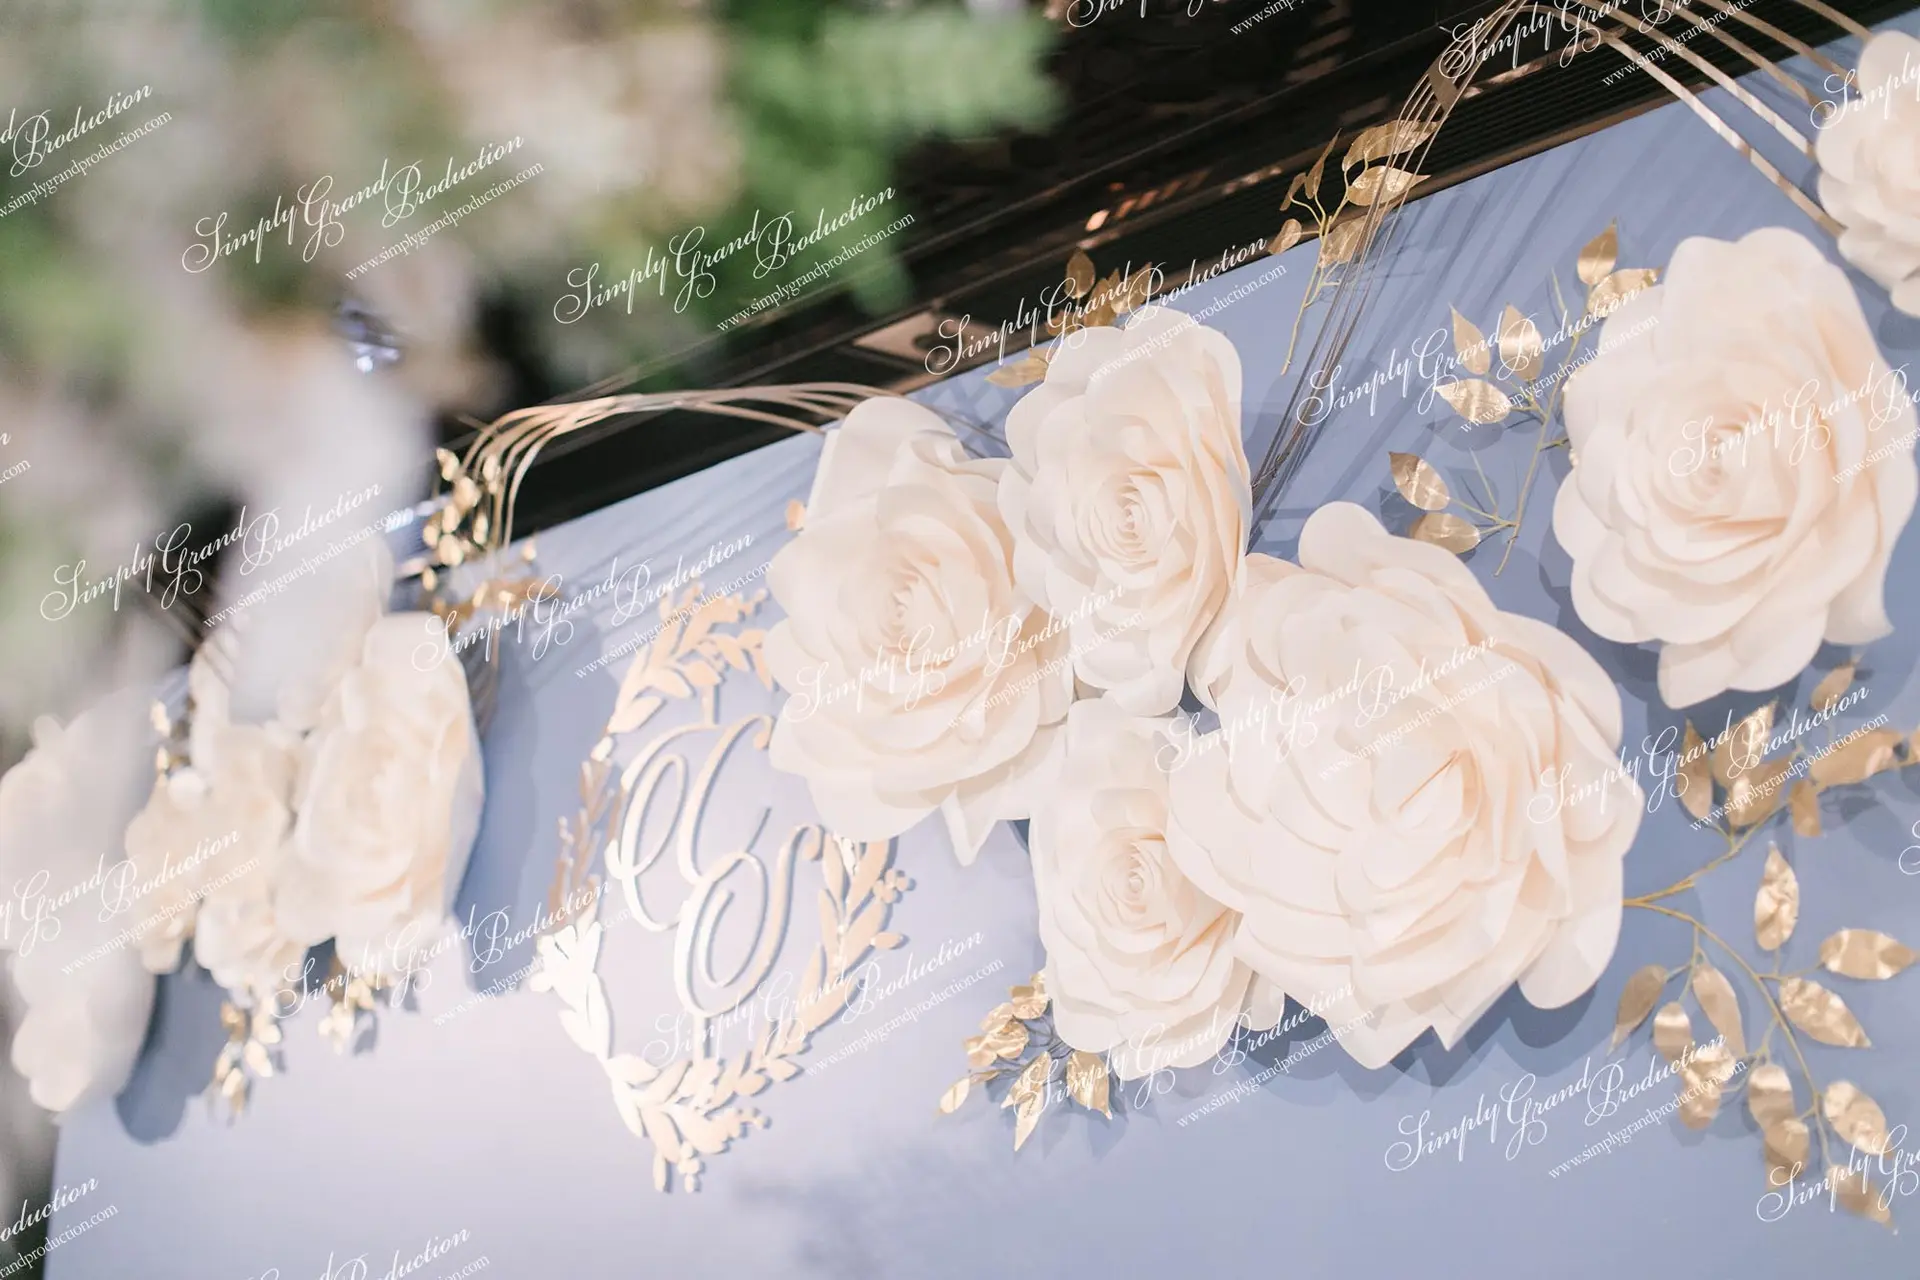 Simply_Grand_Production__wedding_decorationd_paper_flower_backdrop_Ritz_Carlton_1_7